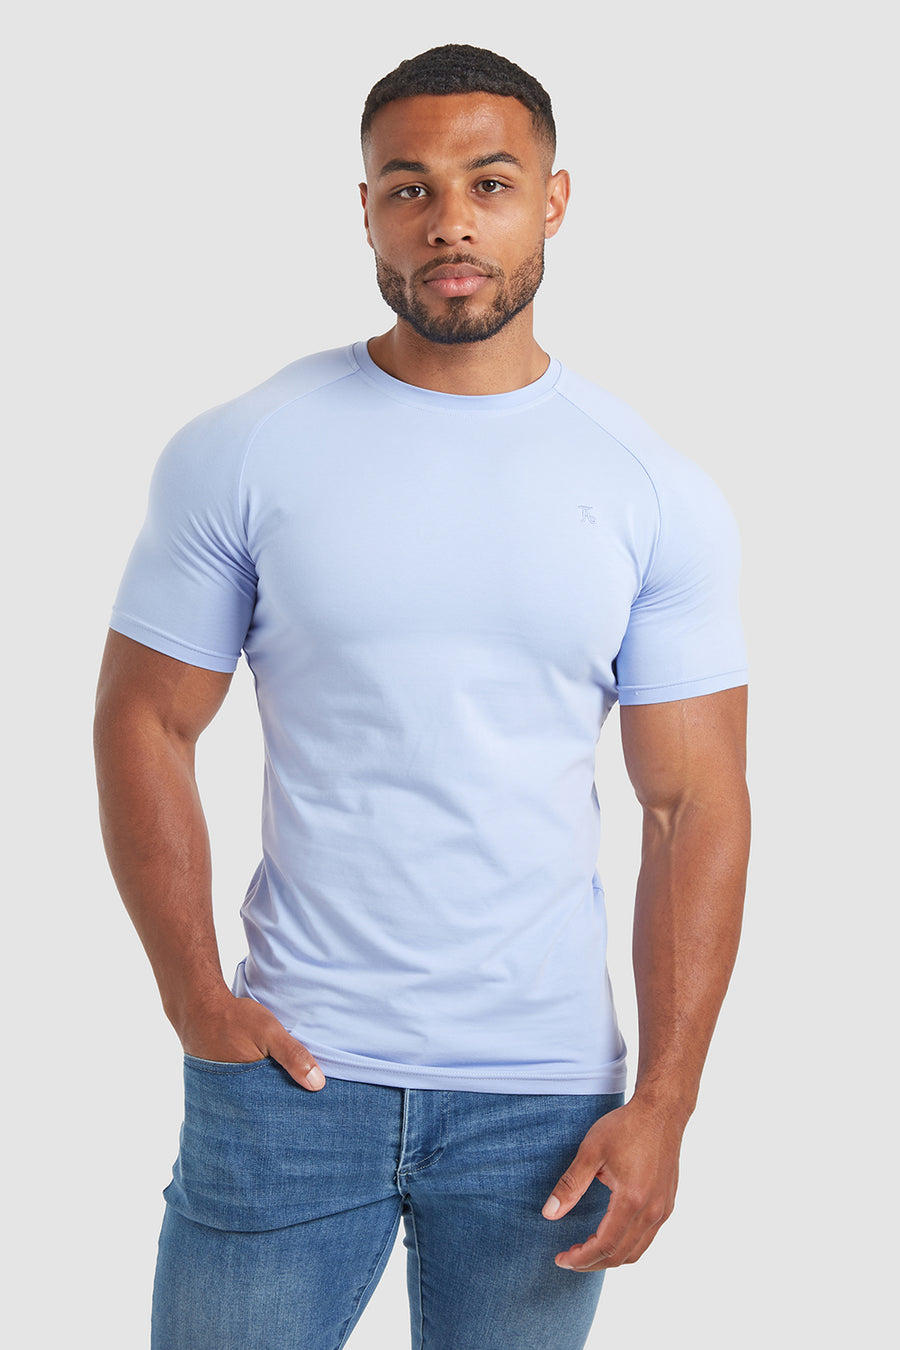 Athletic Fit  T-Shirt in Lilac Haze - TAILORED ATHLETE - USA